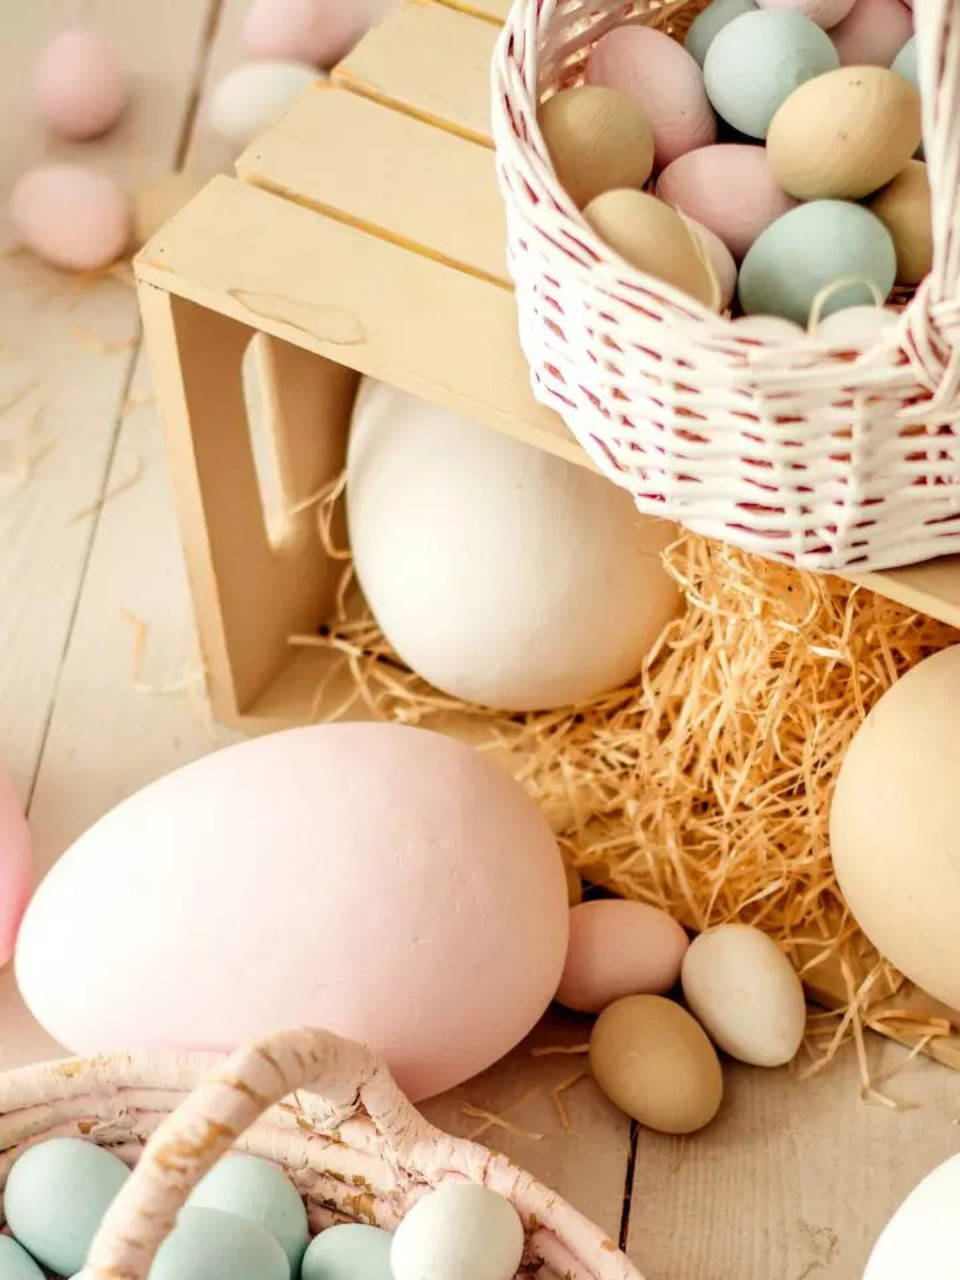 History Of Easter Eggs: What are Easter Eggs? What Do Eggs Have to